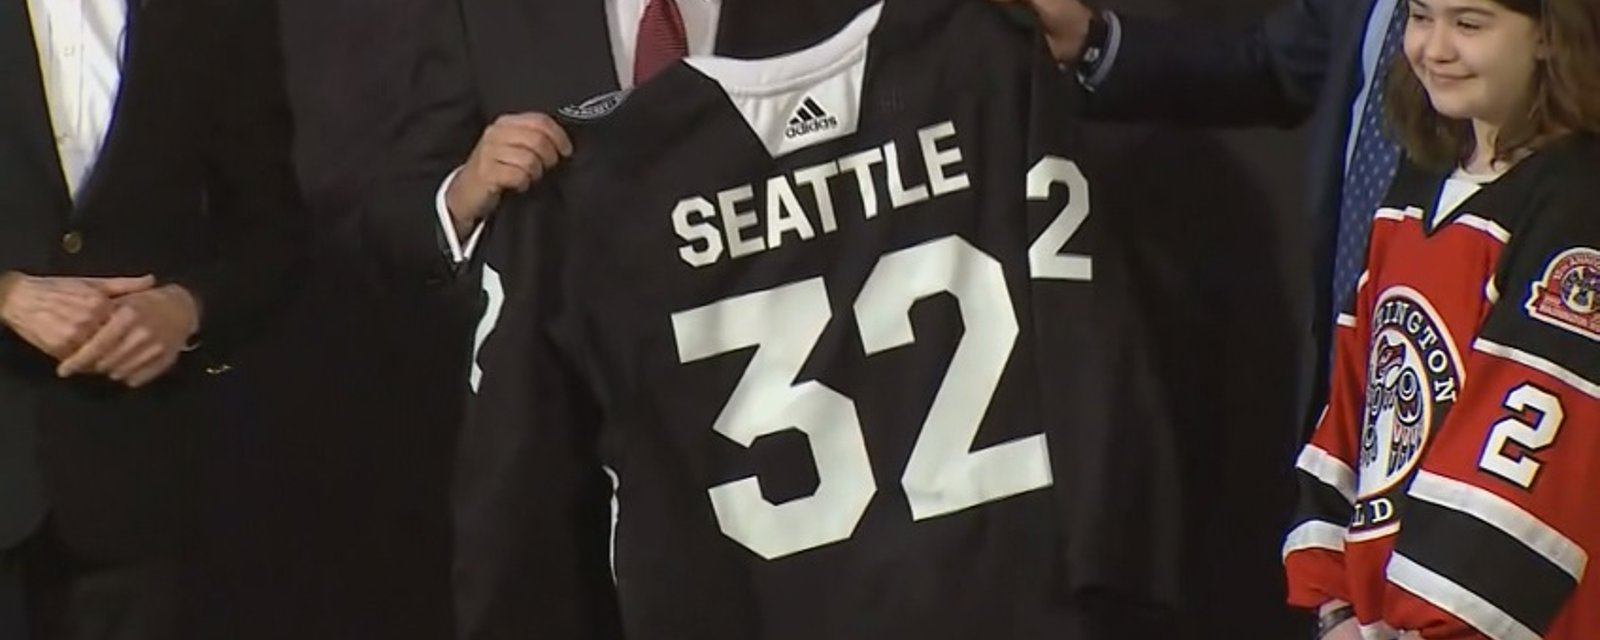 Seattle franchise’s name has reportedly been leaked! 